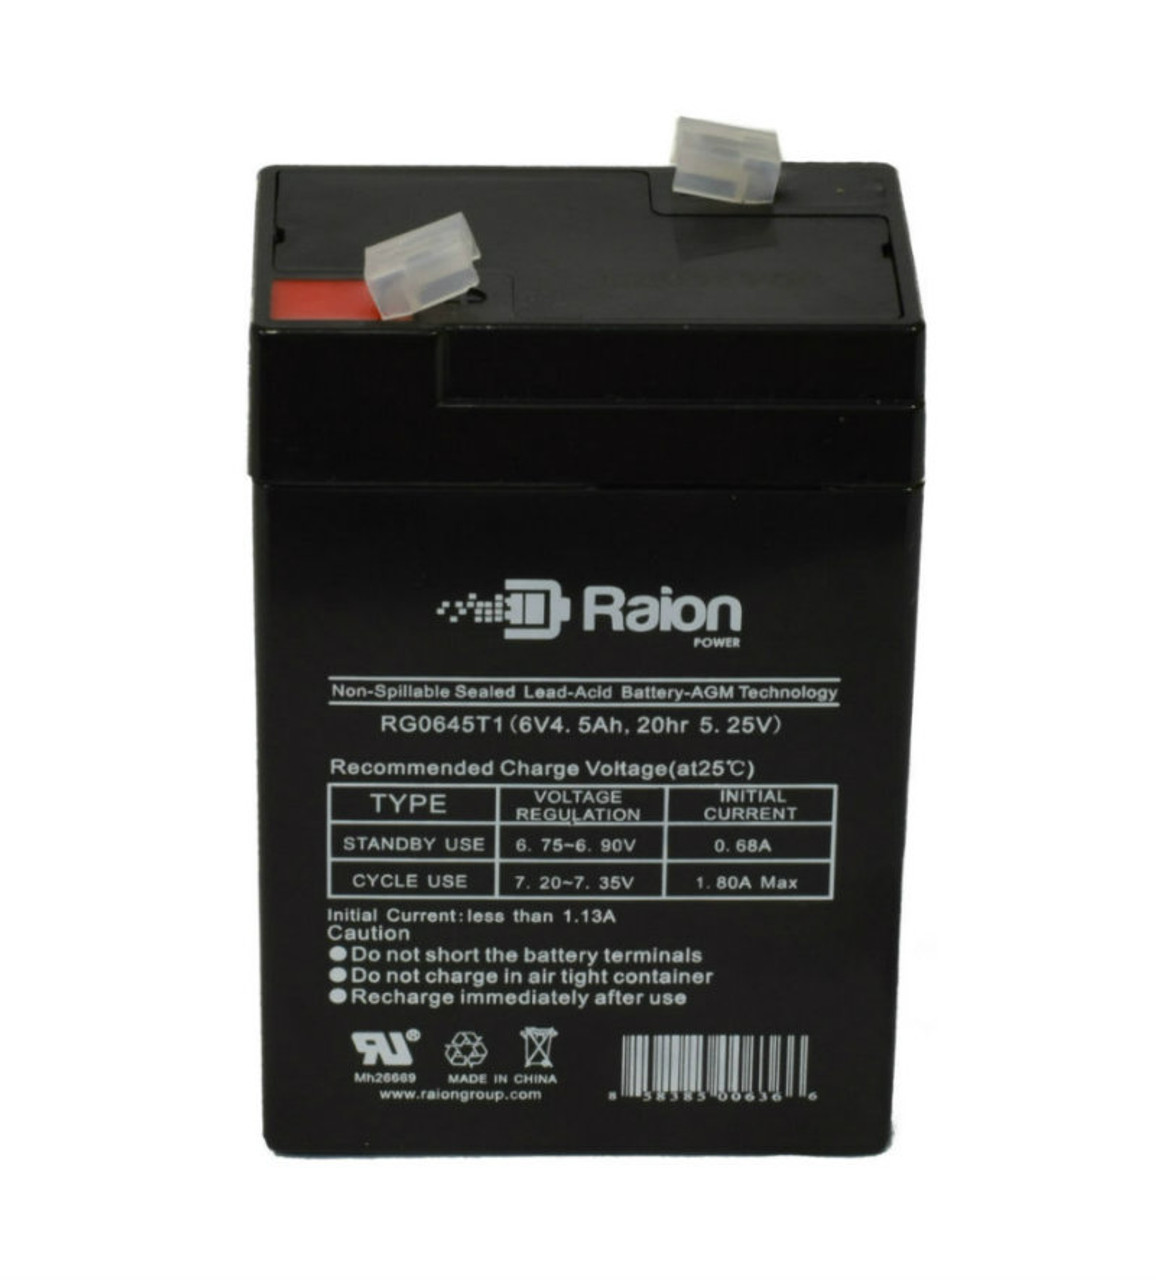 Raion Power RG0645T1 Replacement Battery Cartridge for Baxter Healthcare 522 MICROATE Infusion Pump